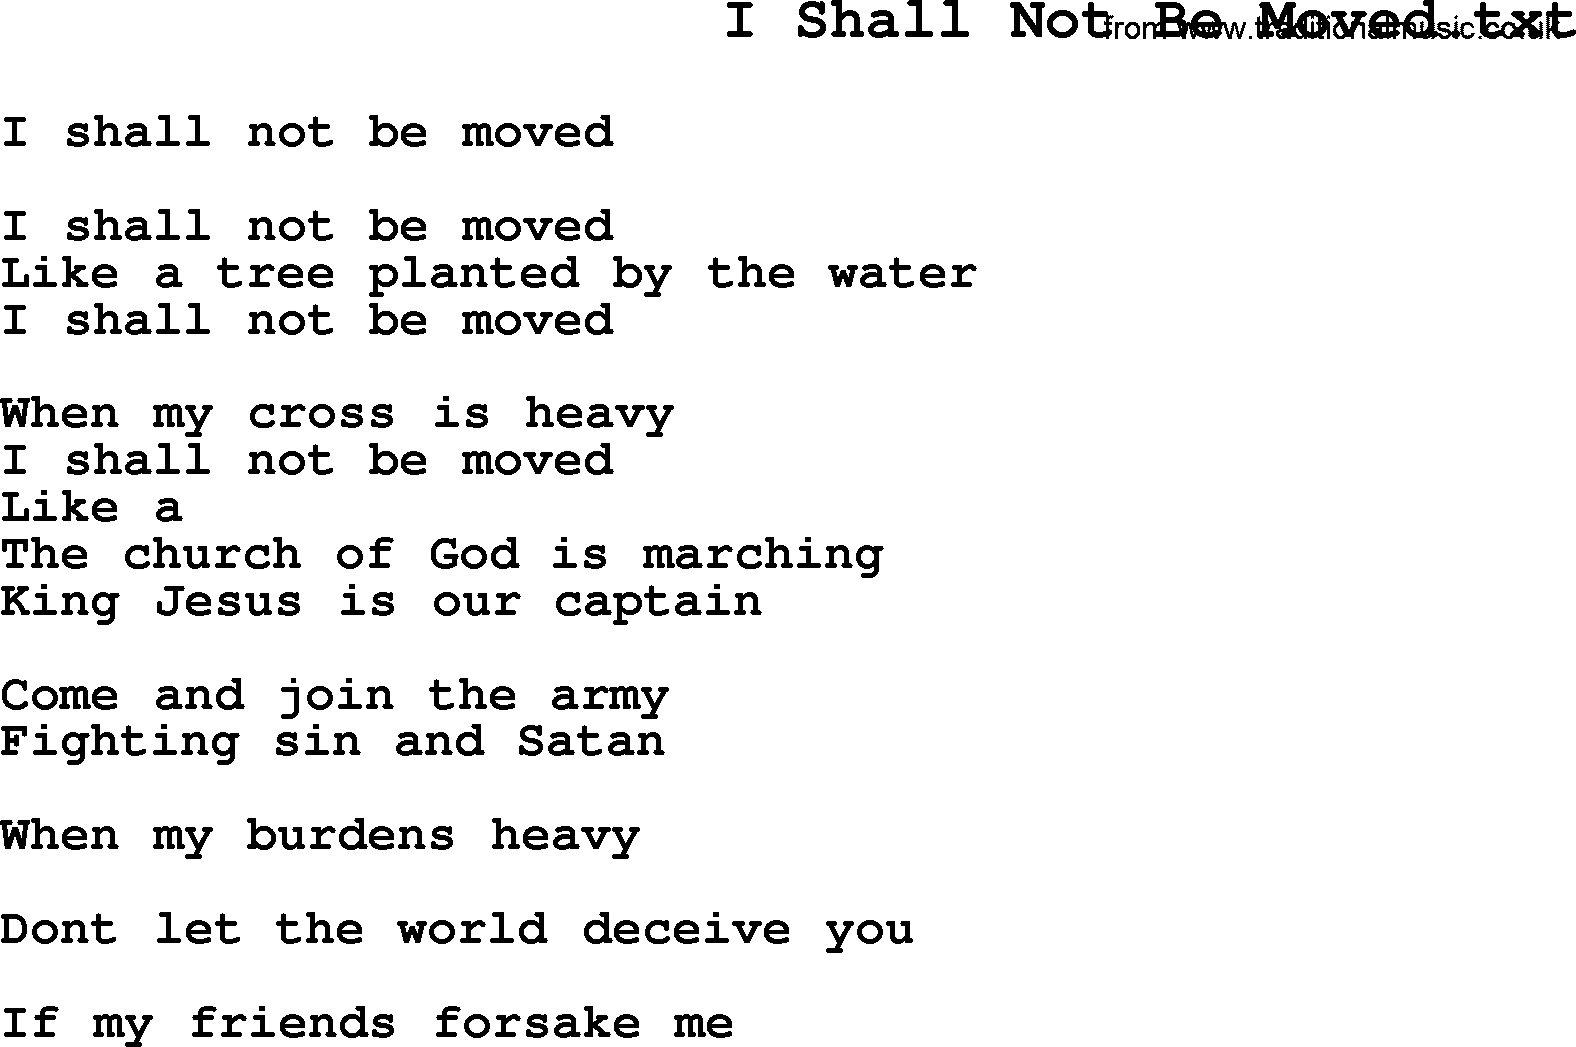 Negro Spiritual Song Lyrics for I Shall Not Be Moved